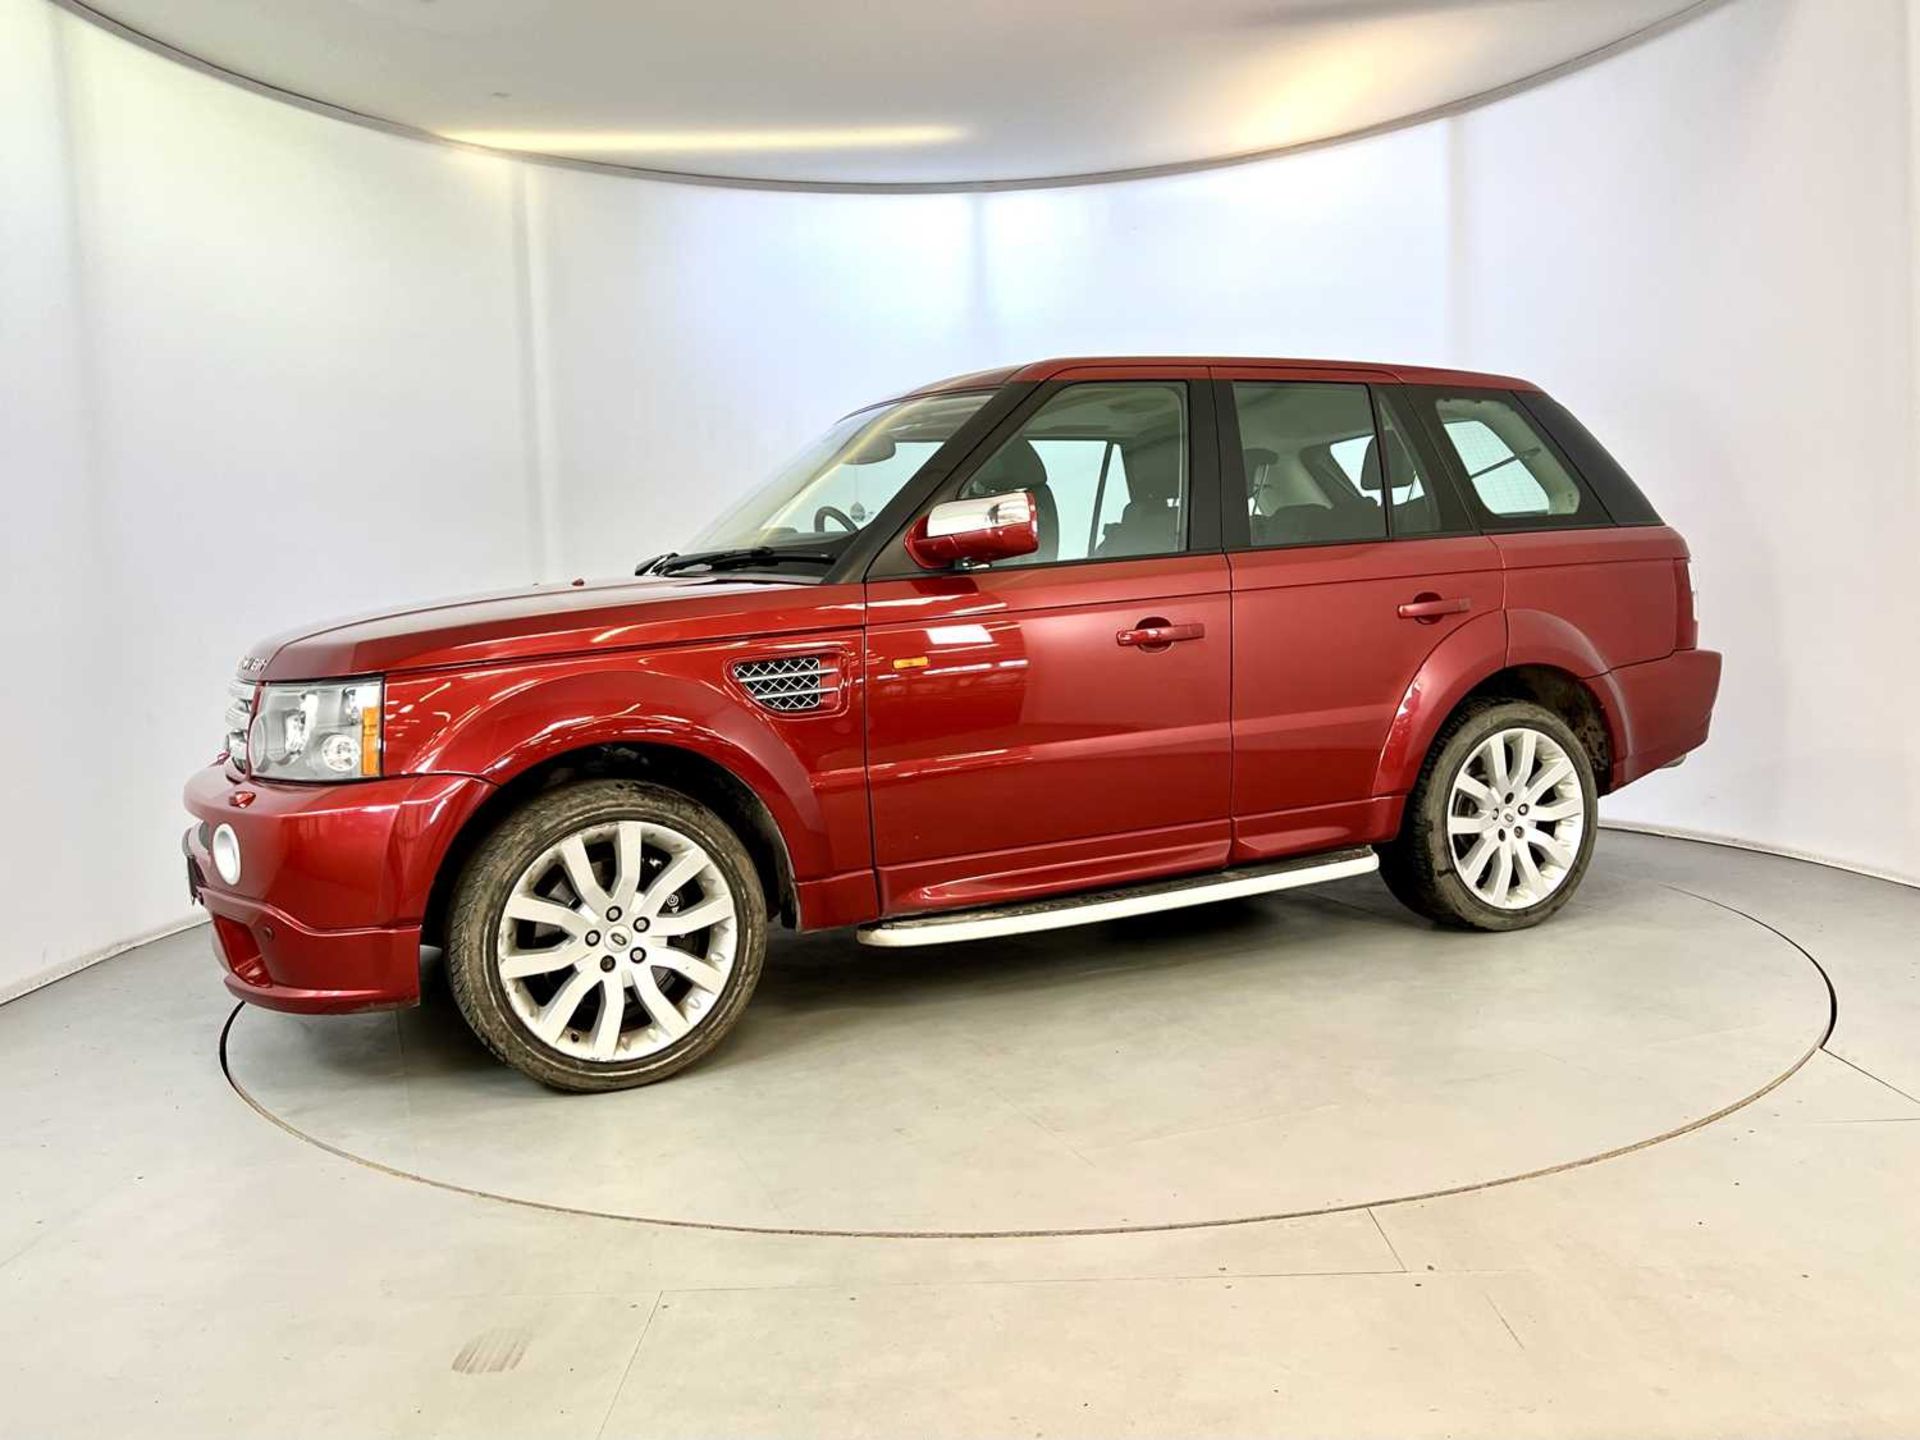 2006 Range Rover Sport 4.2 Supercharged - Image 4 of 34